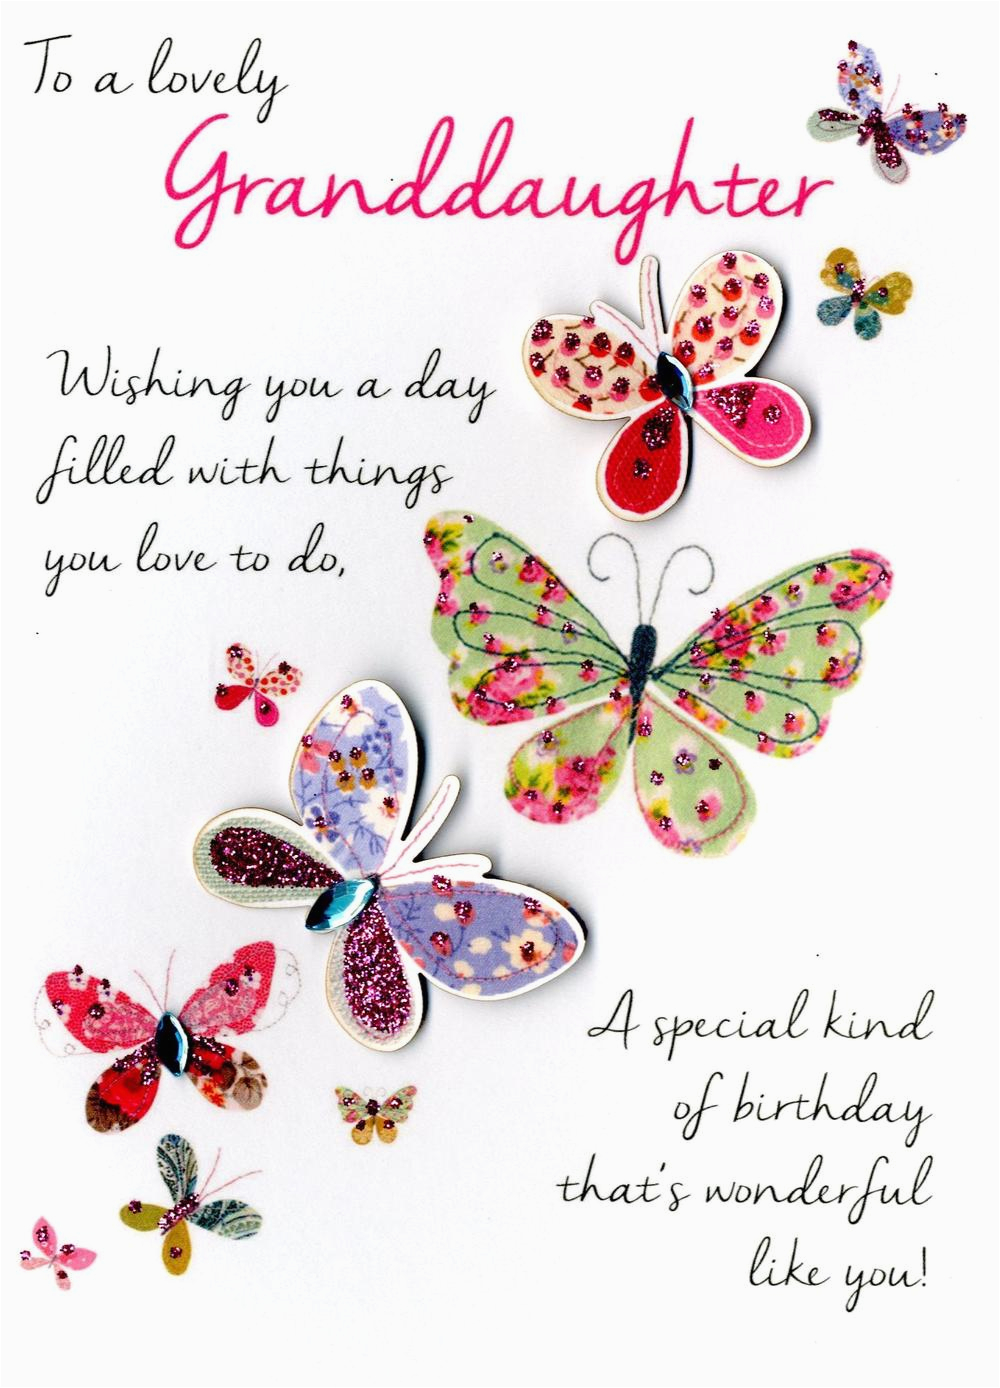 Birthday Greeting Cards for Granddaughter Lovely Granddaughter Birthday Greeting Card Cards